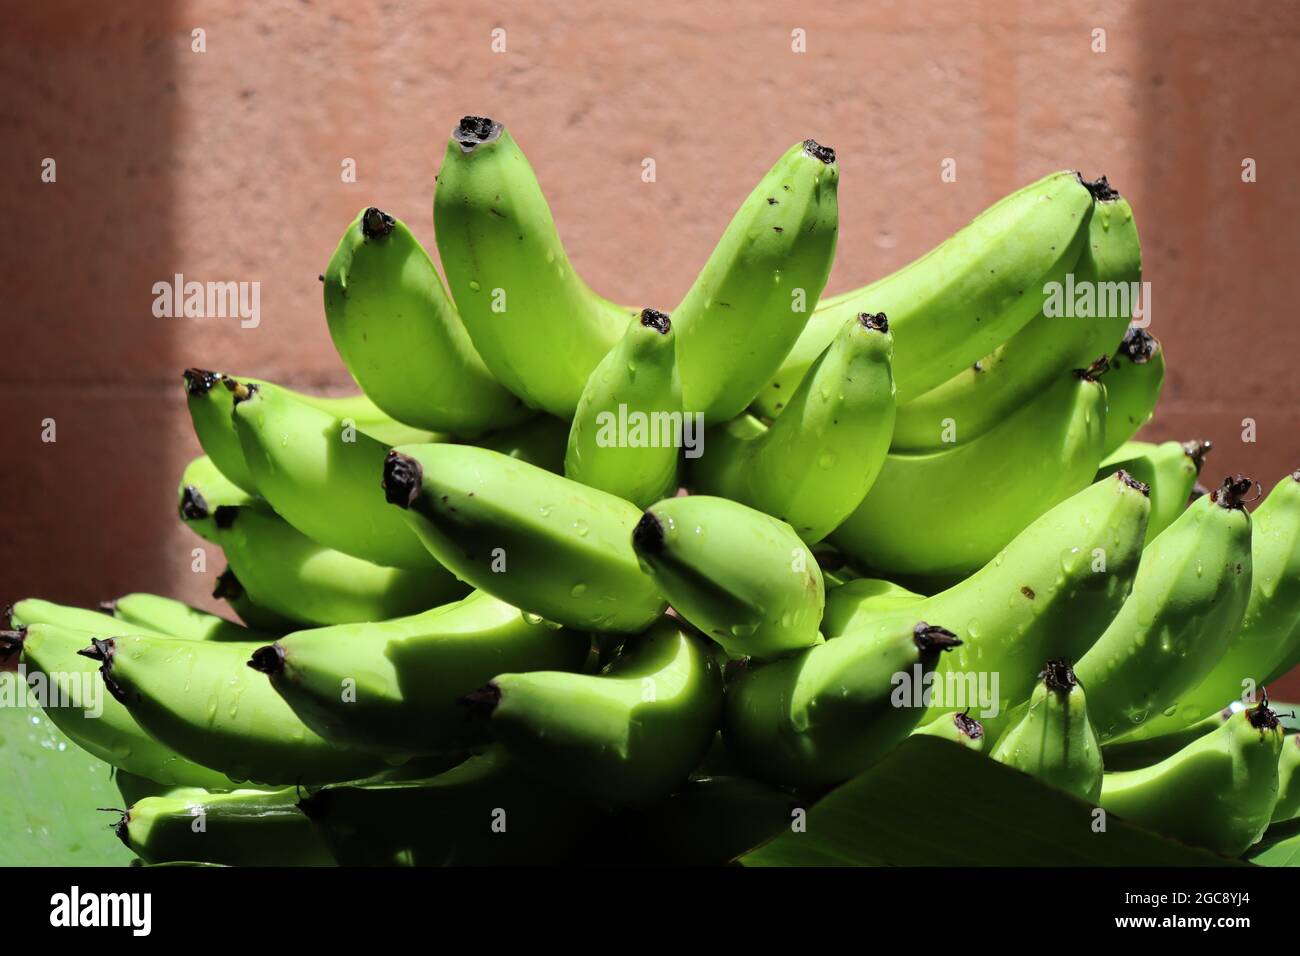 Home grow banana from Sri Lanka, very popular fruit to cultivate in home gardens every where in the island, so very tasty fruit. Stock Photo